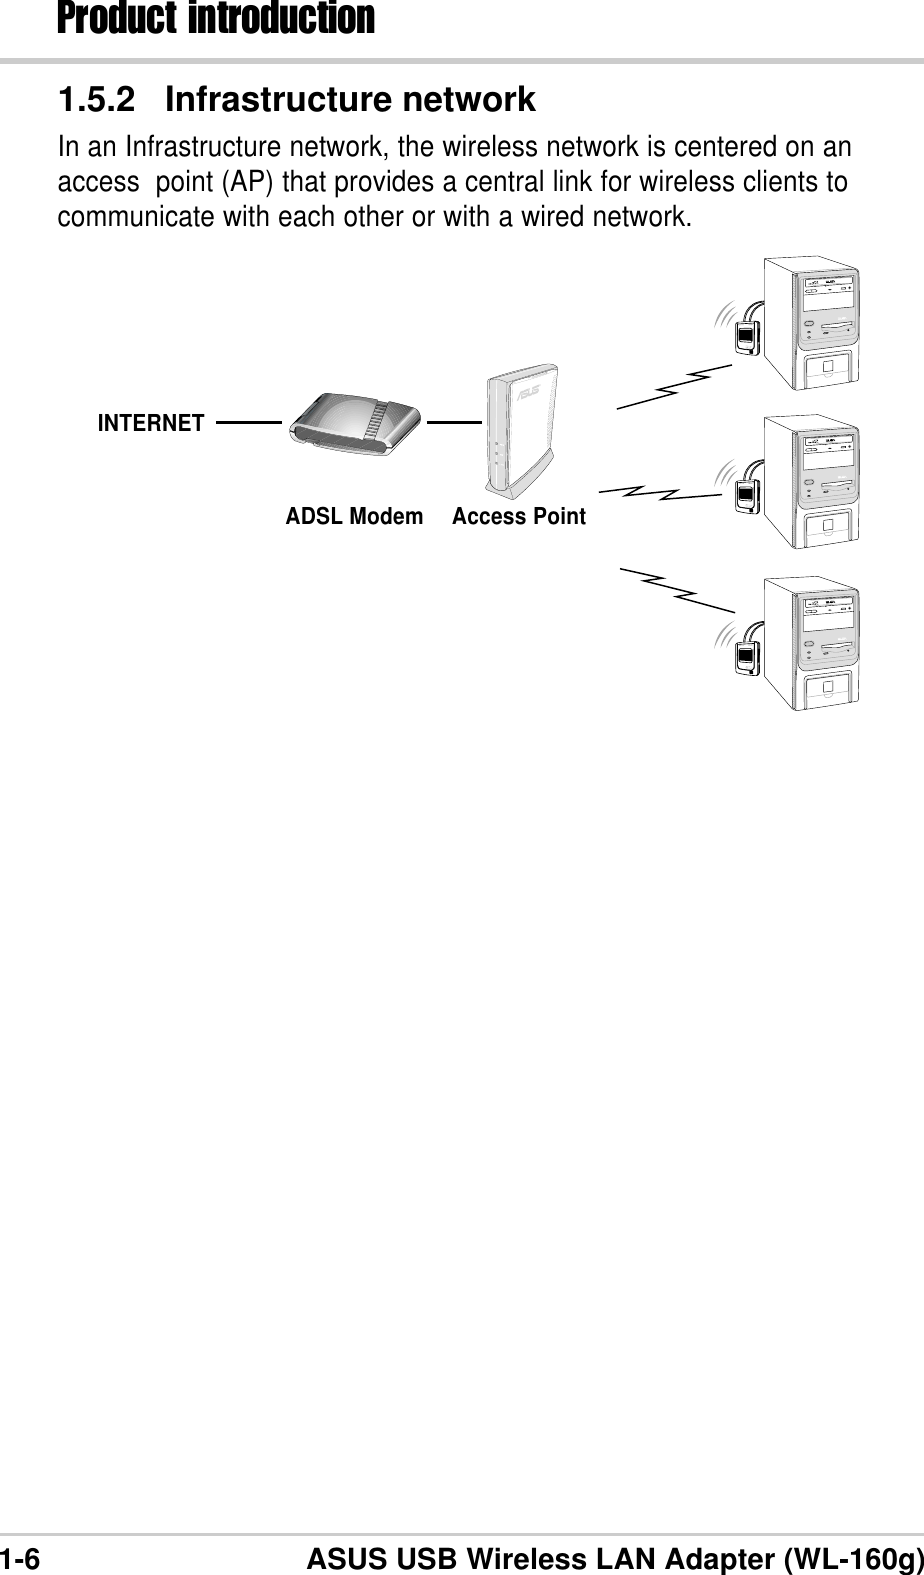 1-6 ASUS USB Wireless LAN Adapter (WL-160g)Product introduction1.5.2 Infrastructure networkIn an Infrastructure network, the wireless network is centered on anaccess  point (AP) that provides a central link for wireless clients tocommunicate with each other or with a wired network.INTERNETADSL Modem Access Point